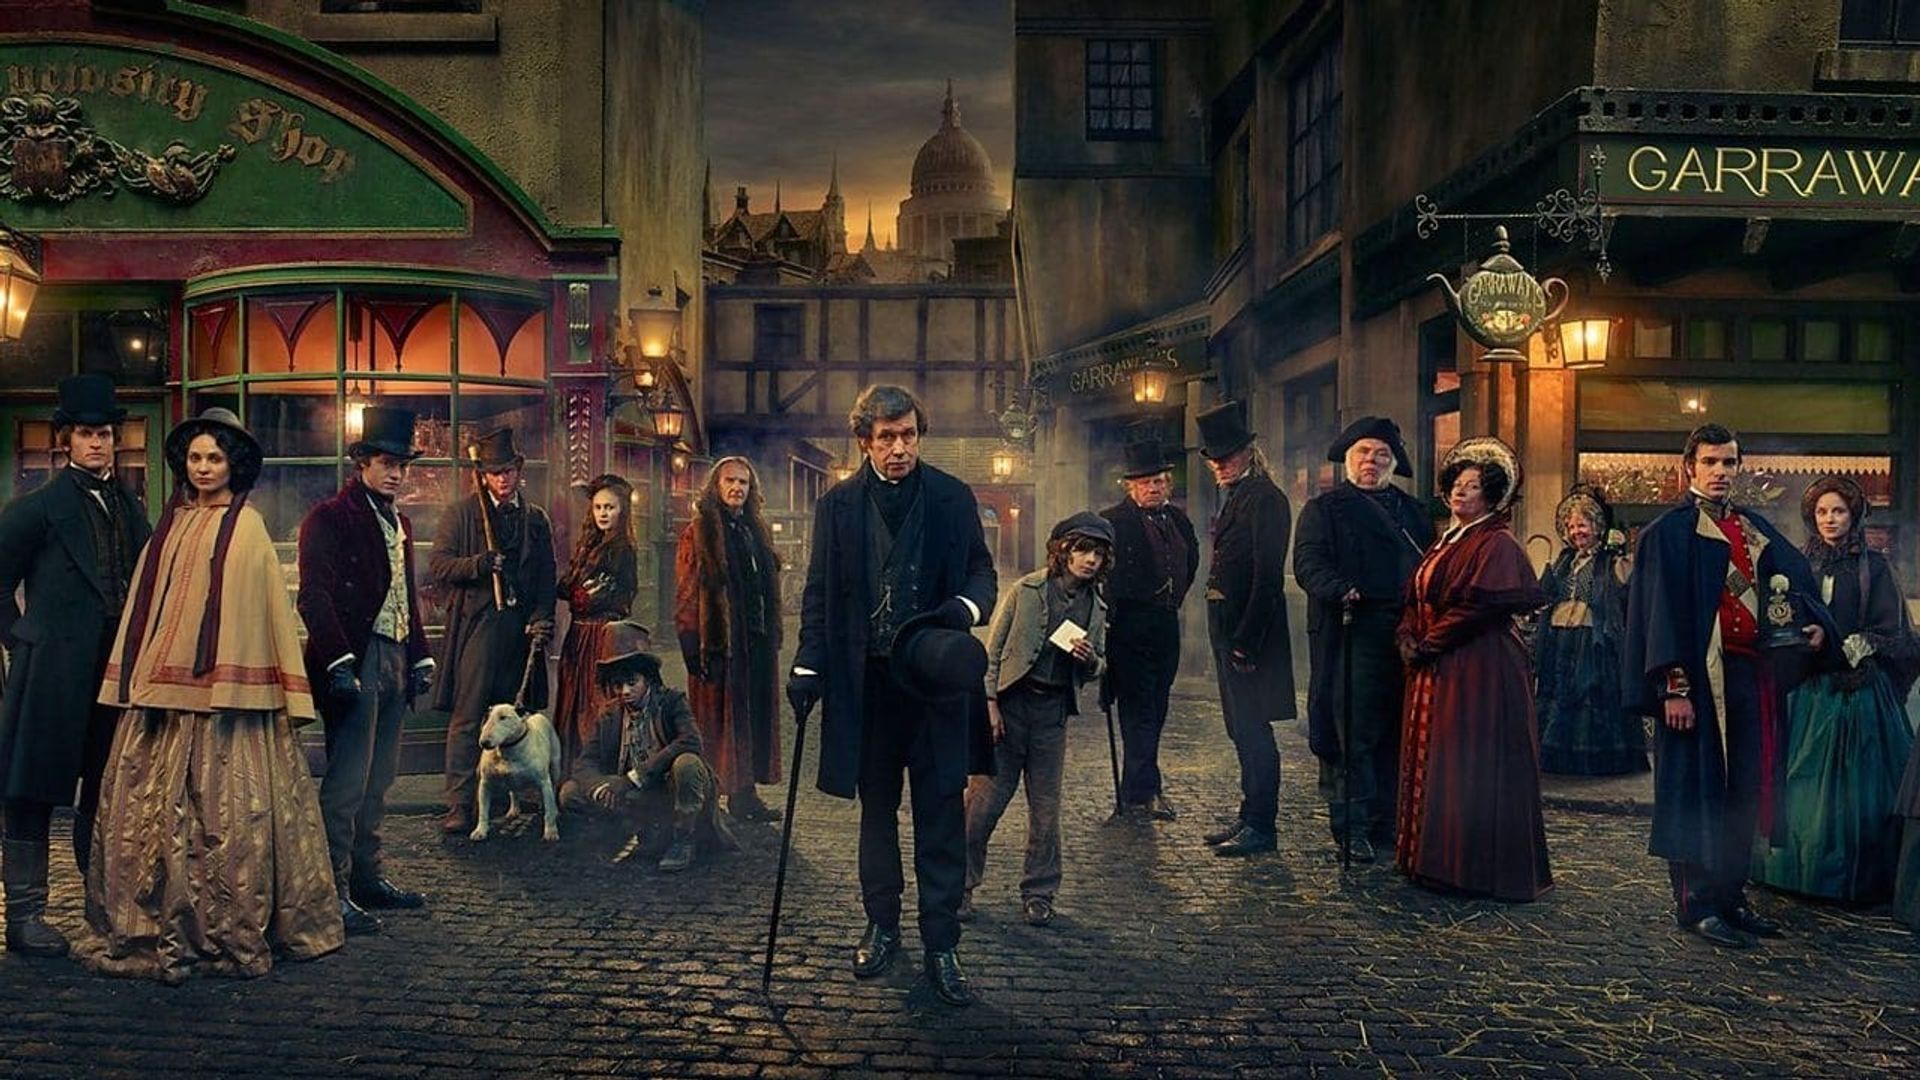 Dickensian background